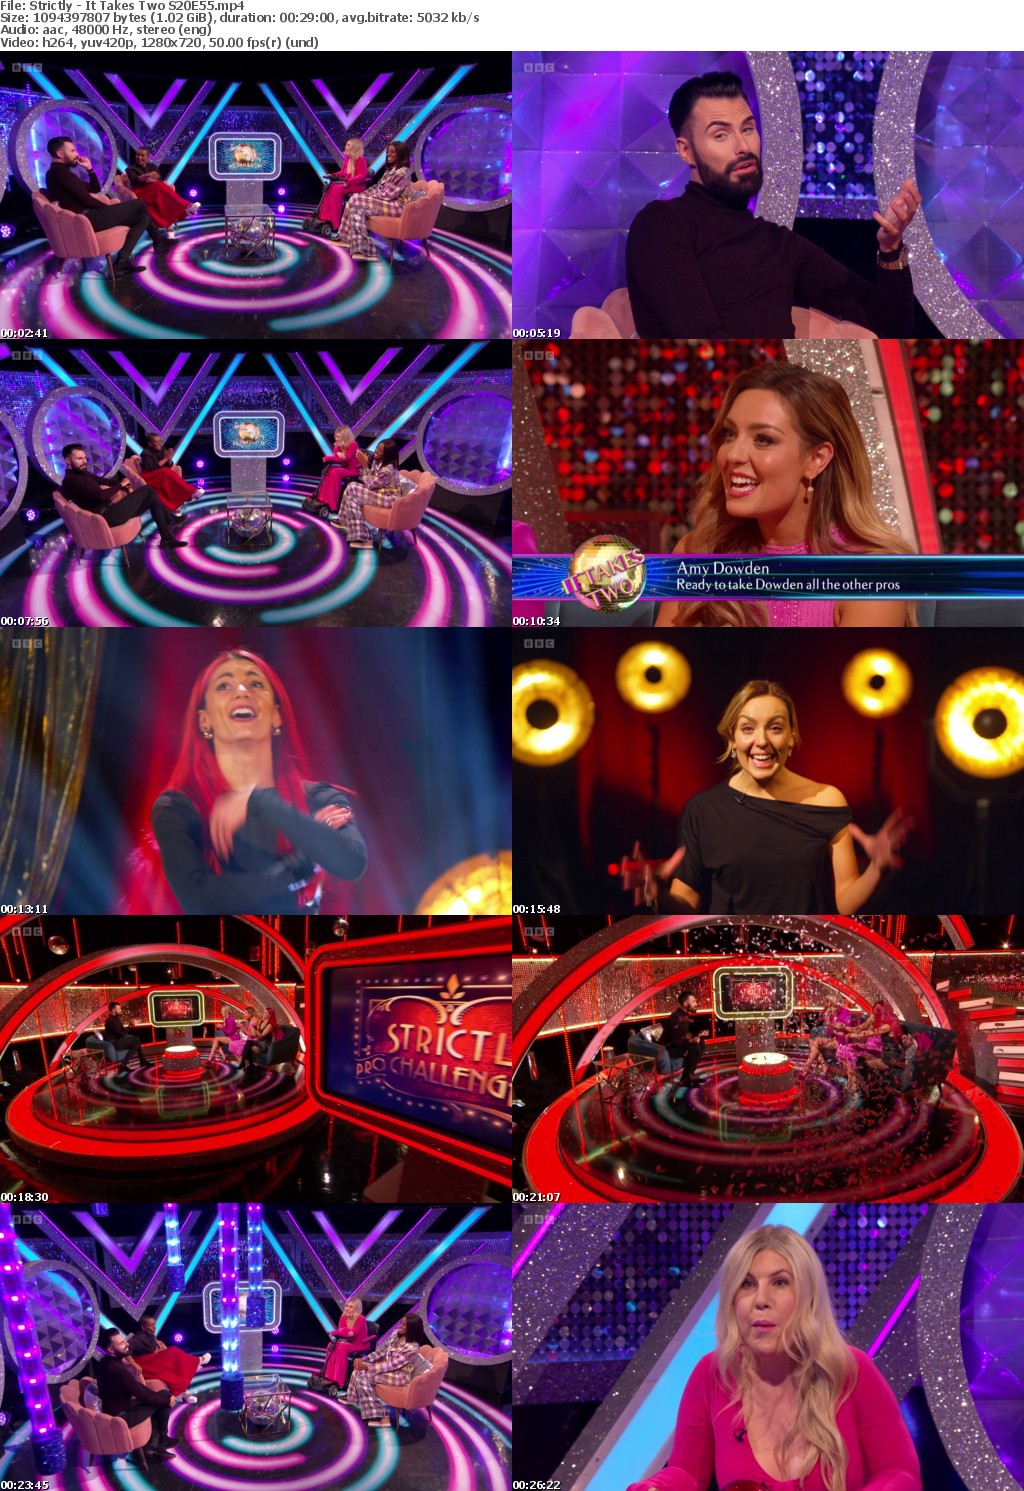 Strictly - It Takes Two S20E55 (1280x720p HD, 50fps, soft Eng subs)